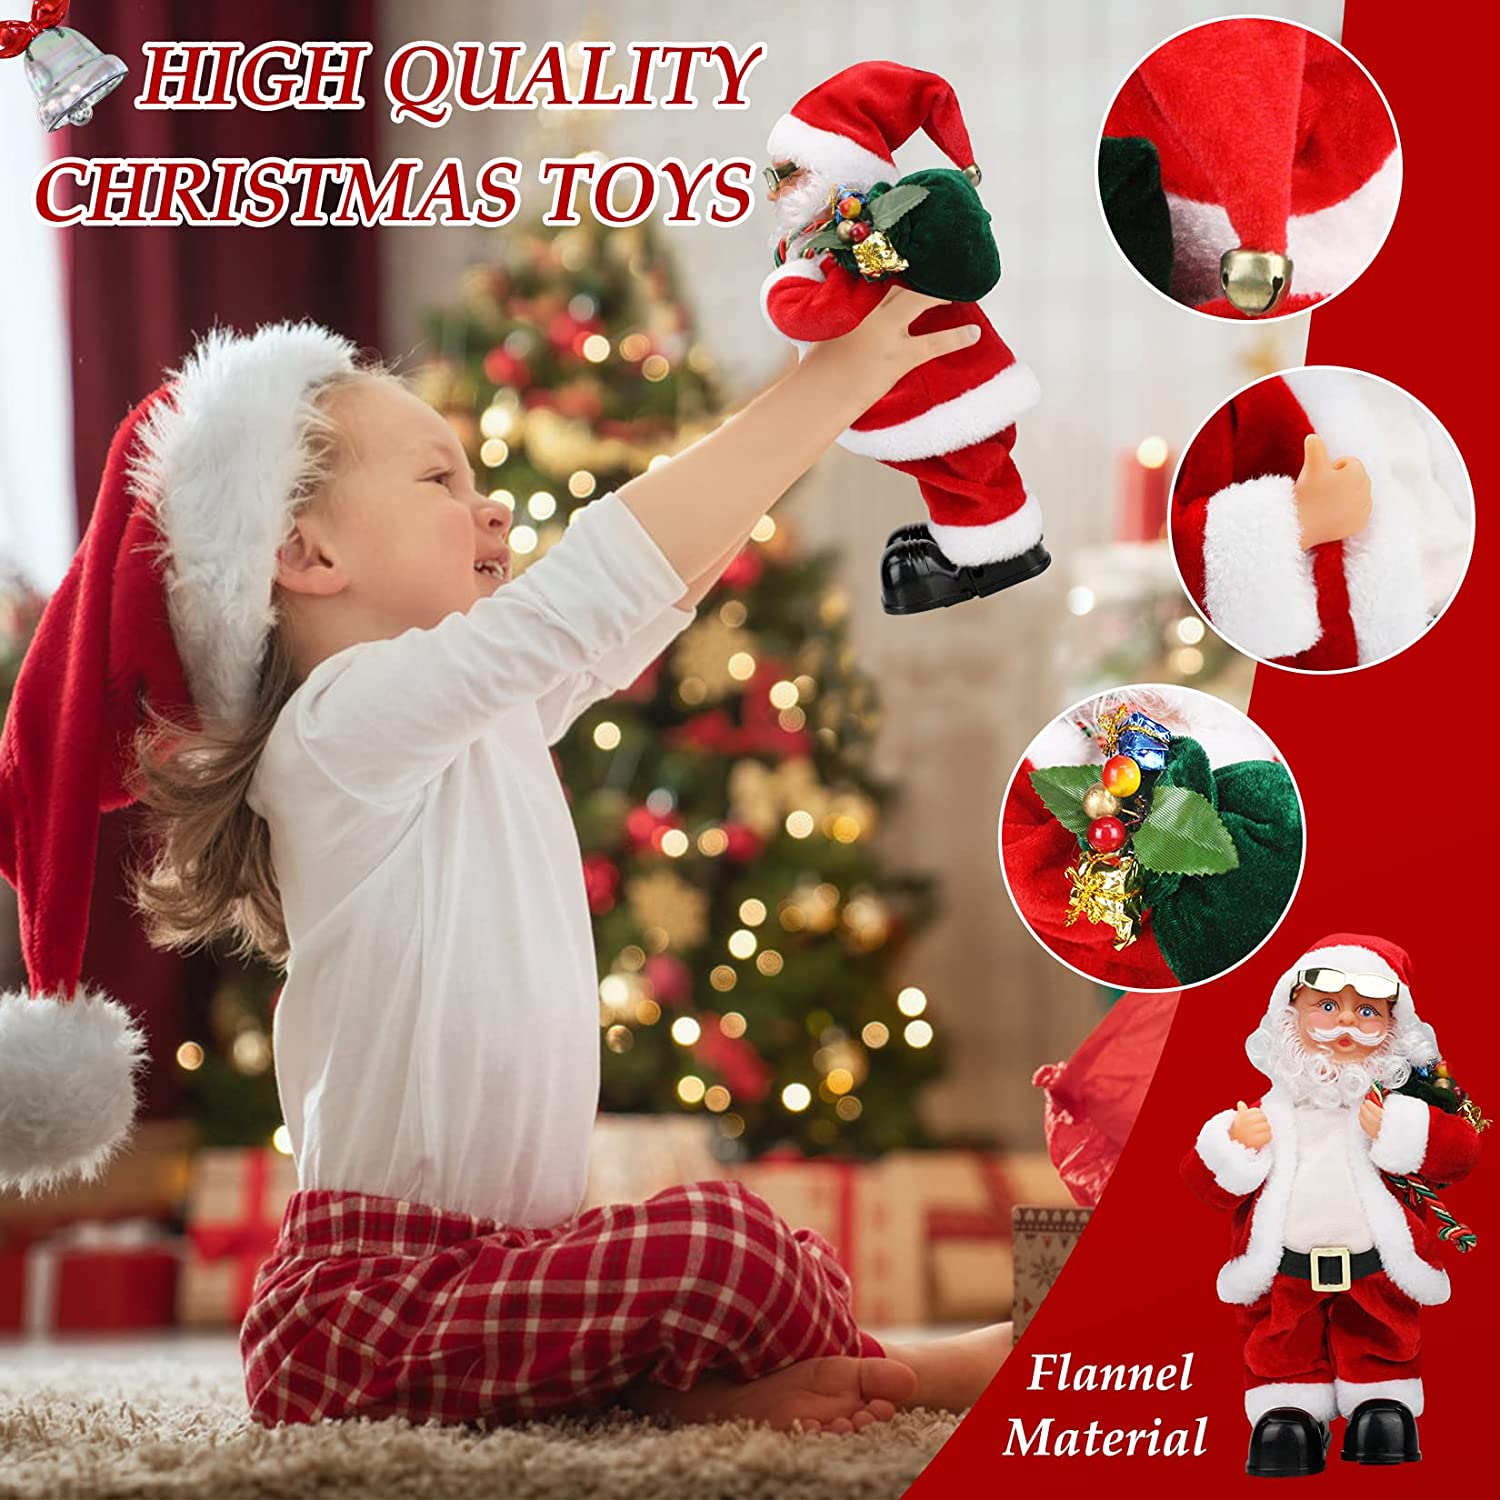 (🎄Christmas Promotion--48%OFF)Belly shaking & Singing Santa Claus Toy(Buy 2 get Free shipping)